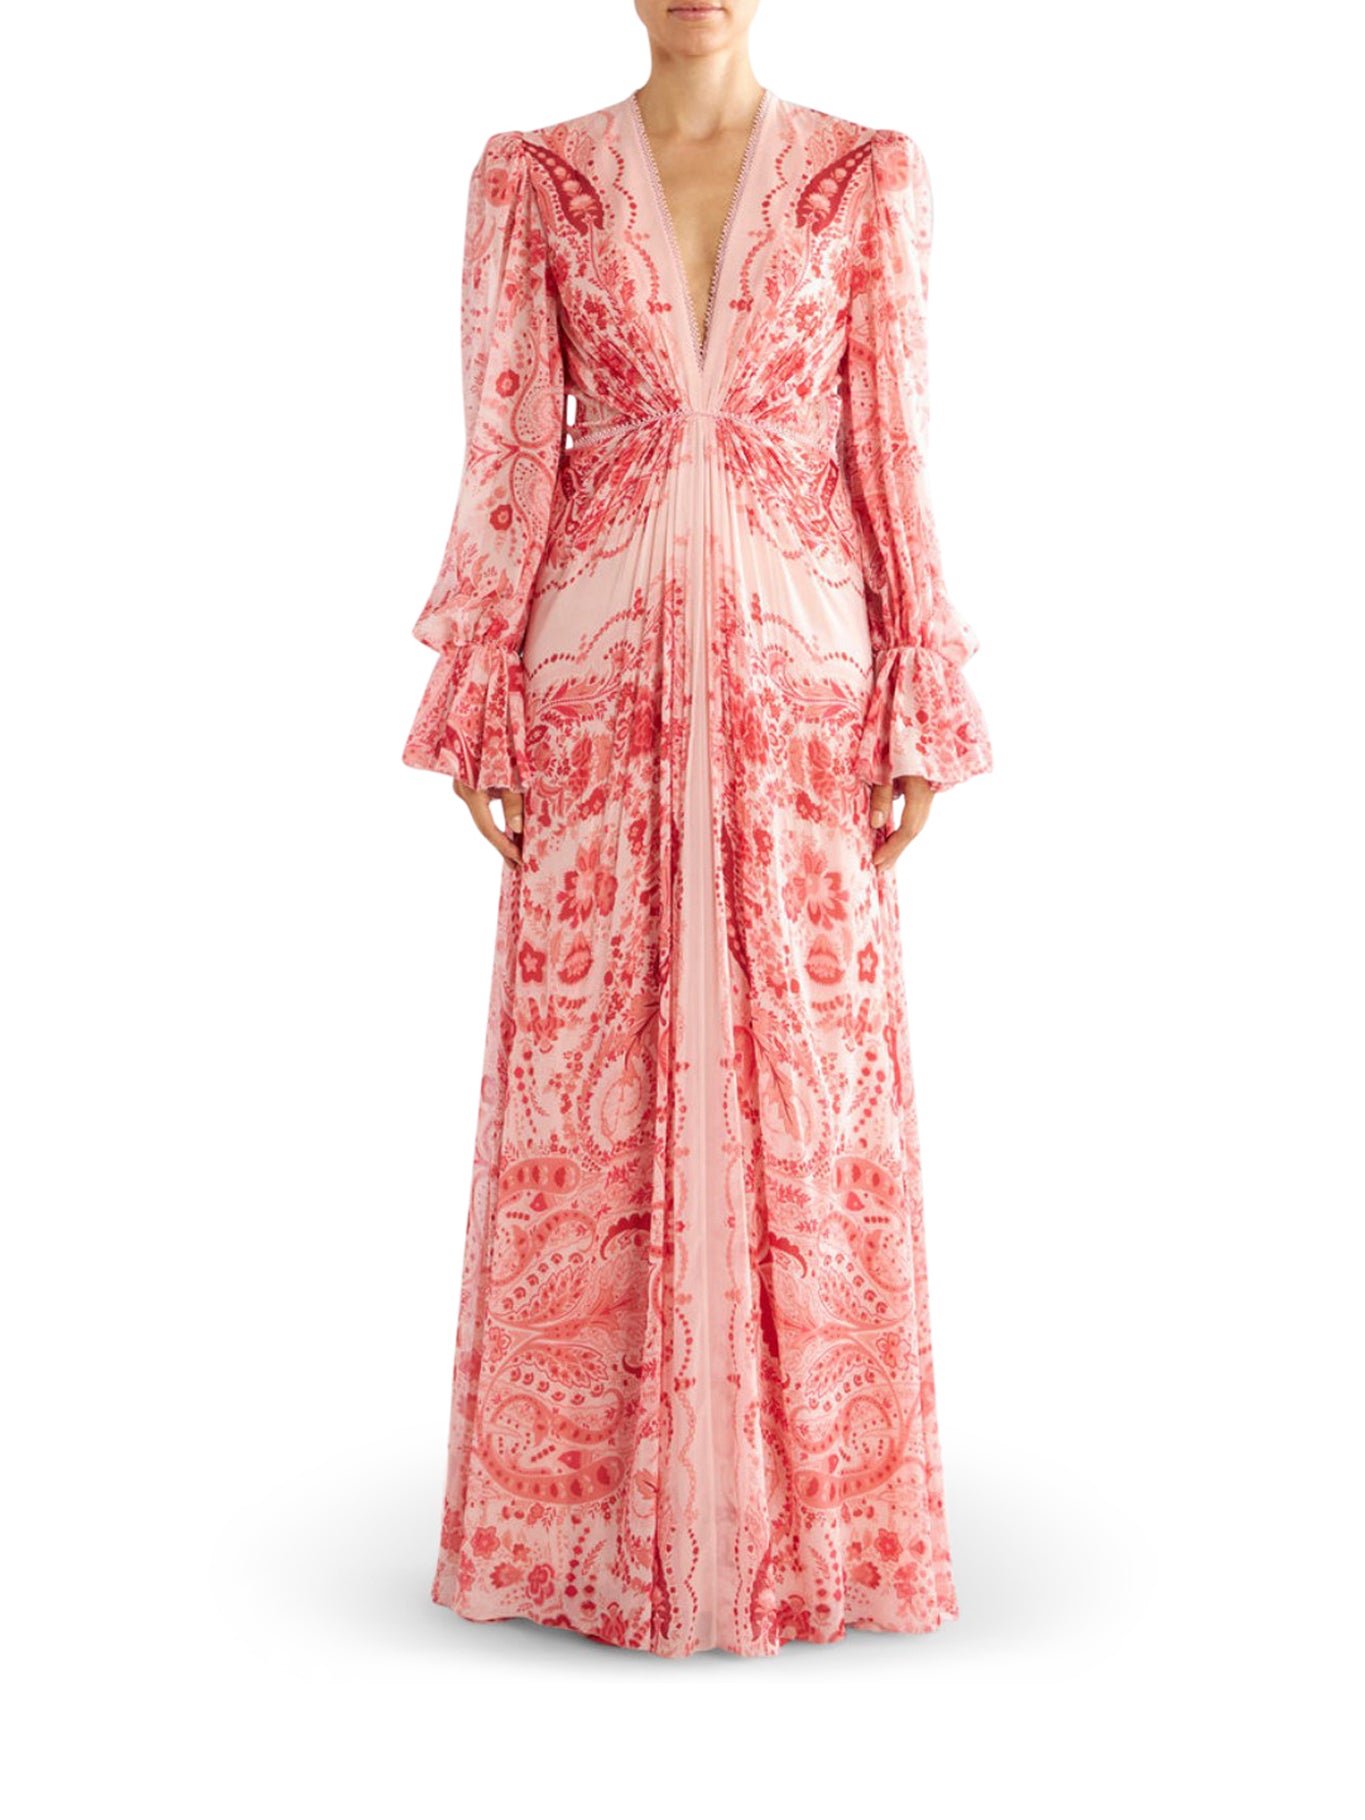 SILK DRESS WITH FLORAL PAISLEY PATTERNS